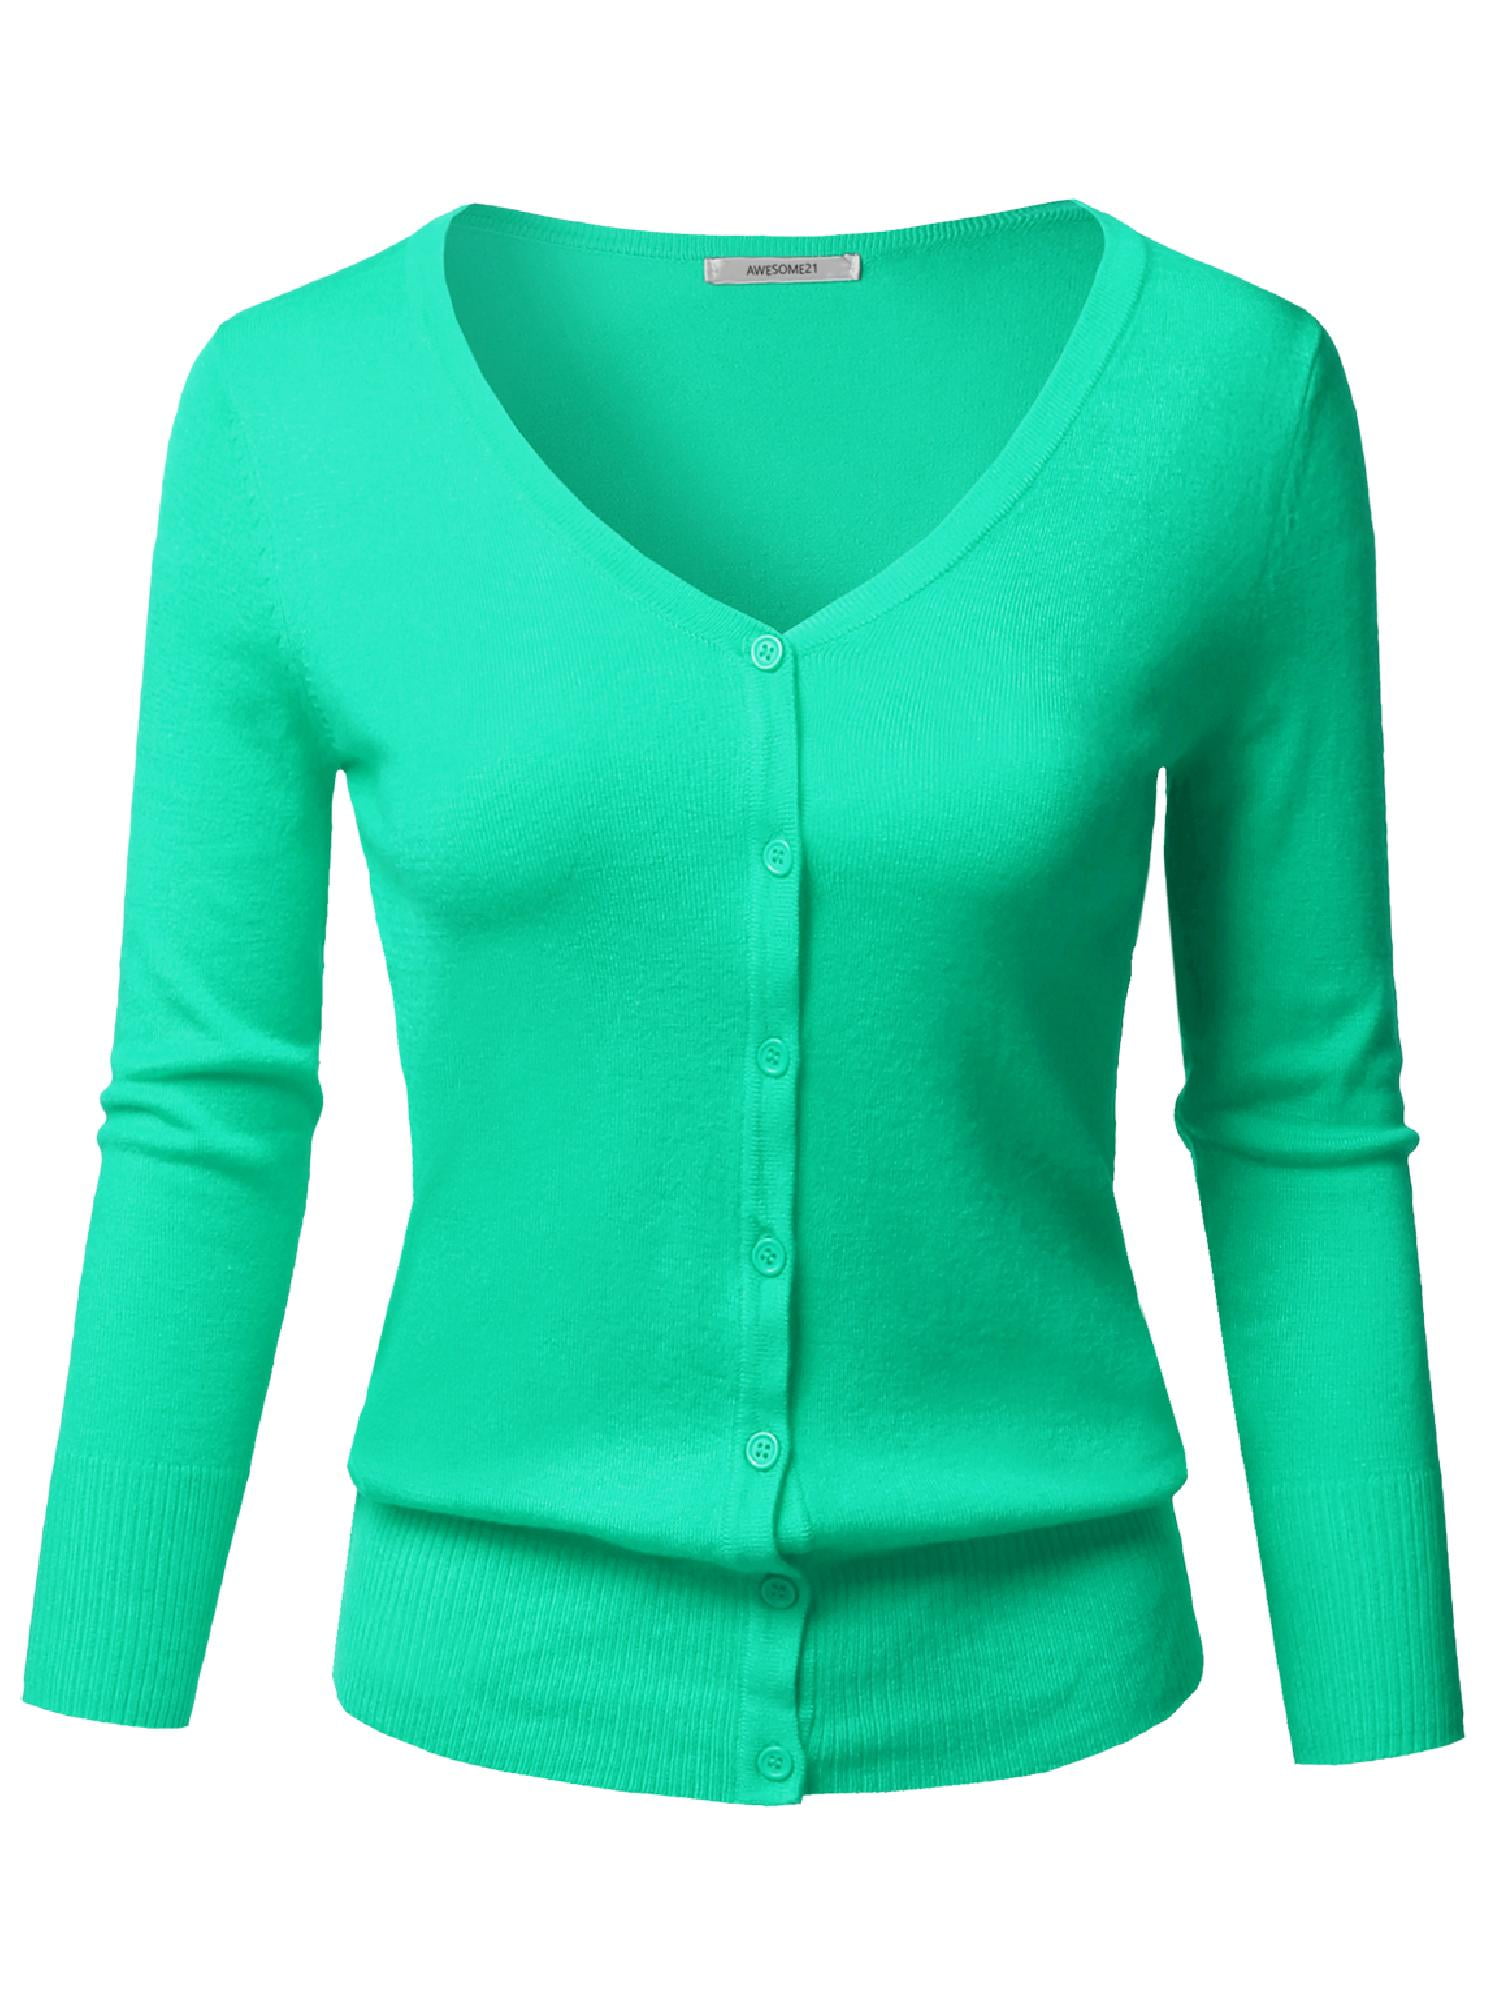 FashionOutfit Women's Solid Button Down V-Neck 3/4 Sleeves Knit ...